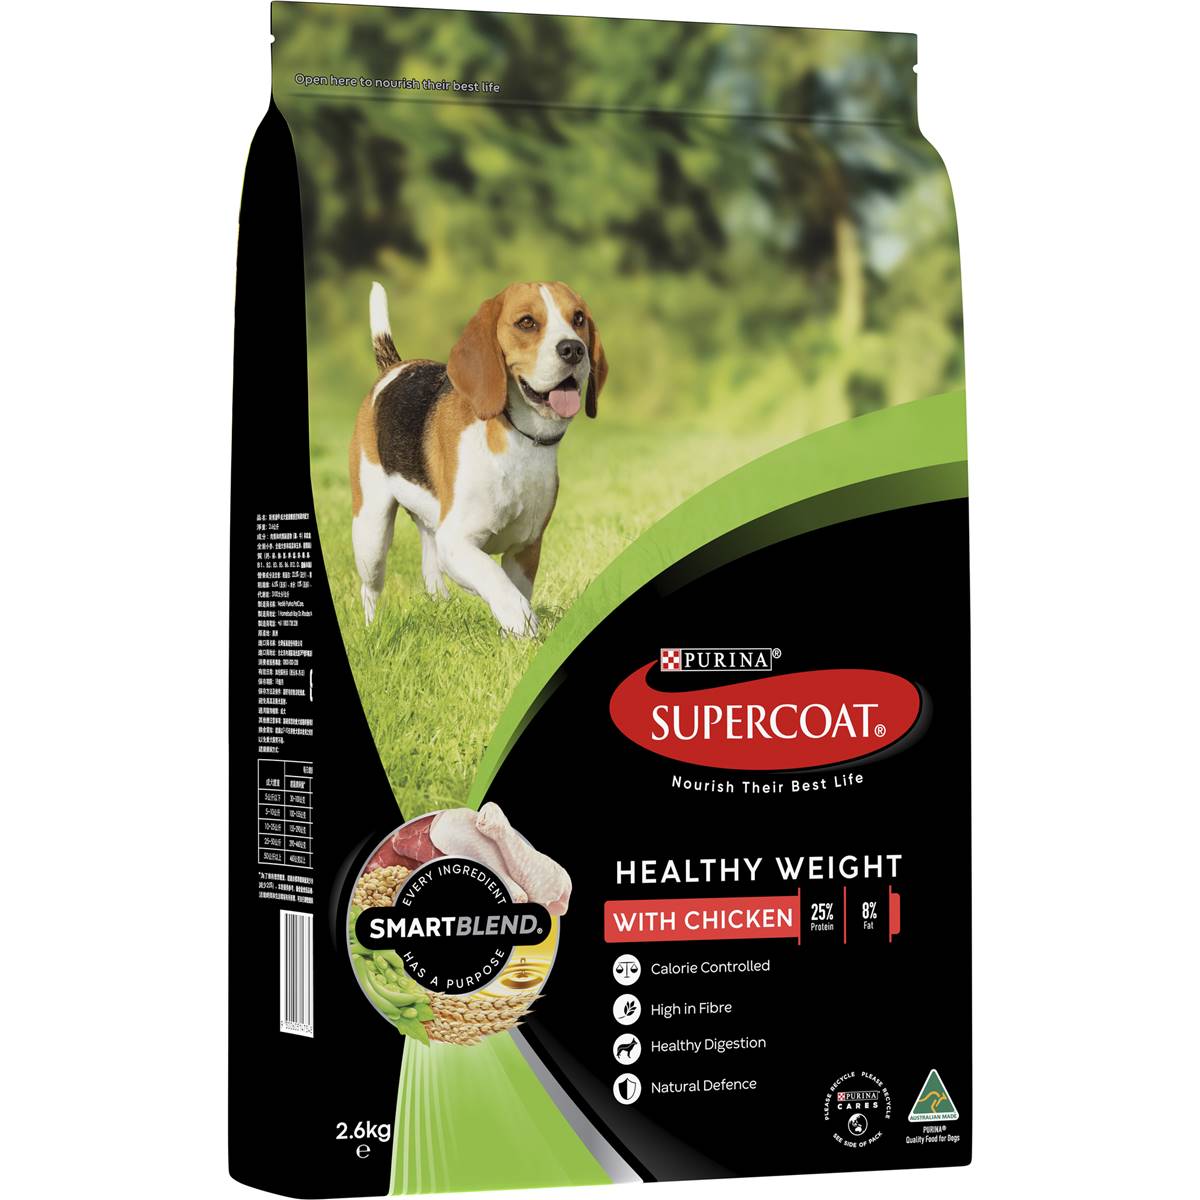 Supercoat Adult Healthy Weight Chicken Dog Food 2.6kg